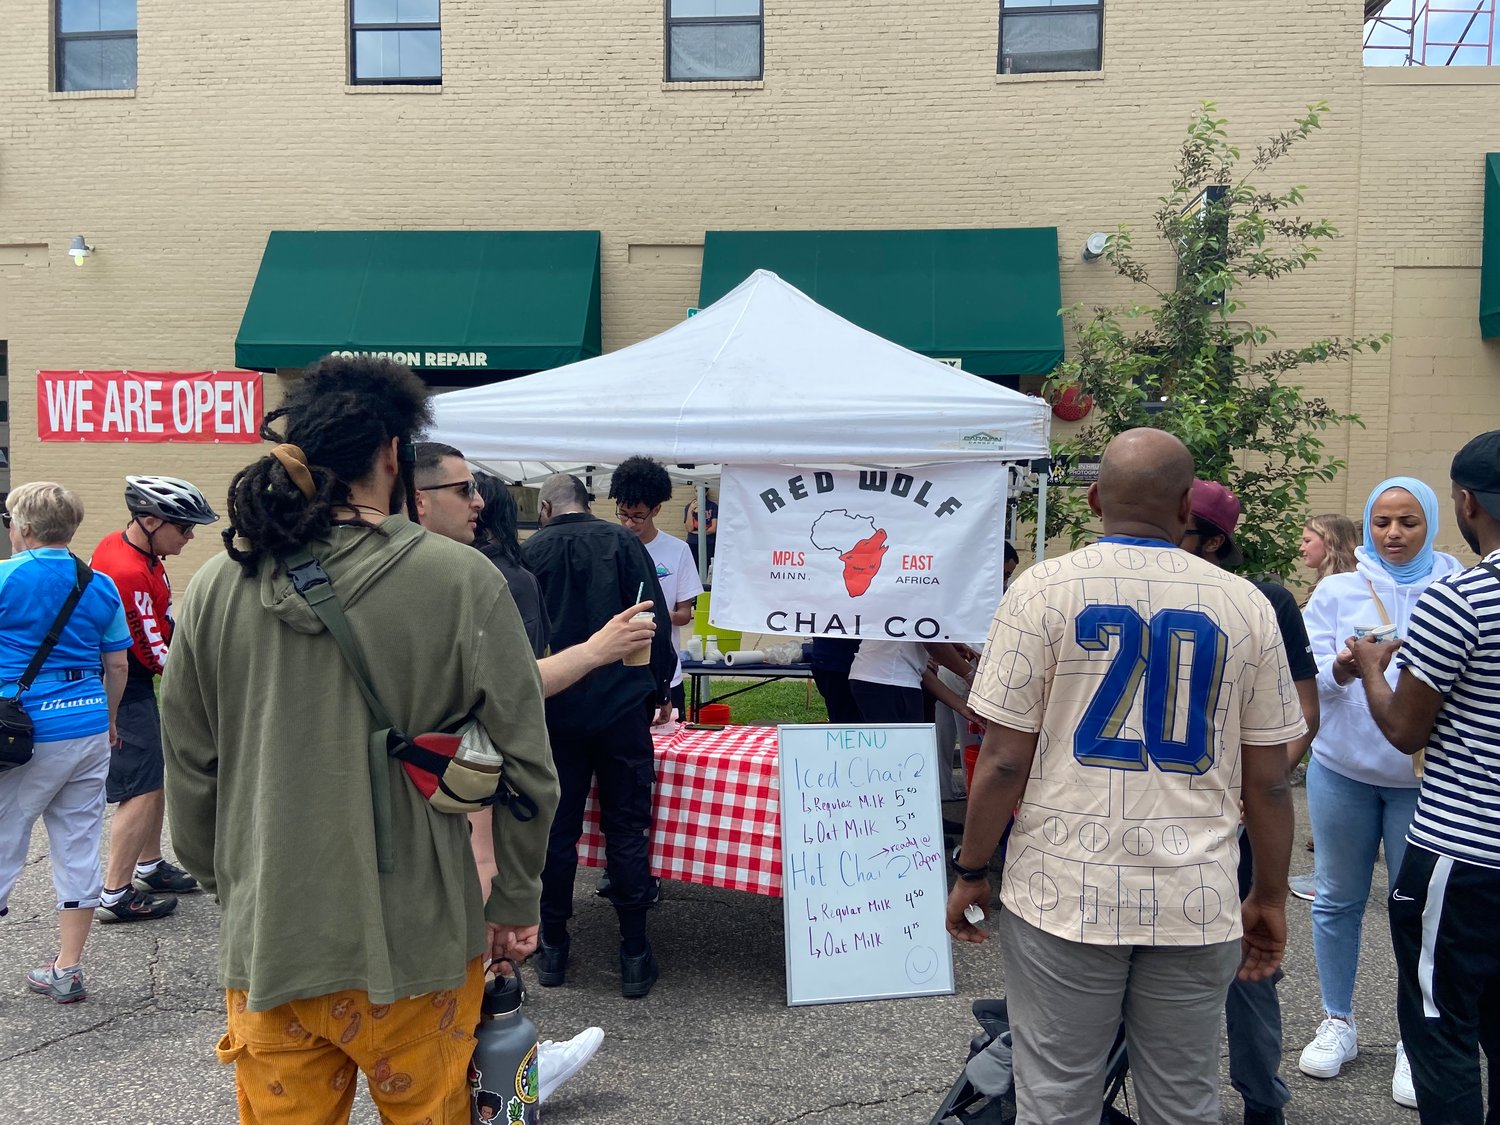 Mohamed Yousif one of the owners of Red Wolf Chai, said, "There’s so many opportunities here [Open Streets] to connect with the community, educate them. We bring something that’s from East Africa and we can talk about what spices make up our Chai."